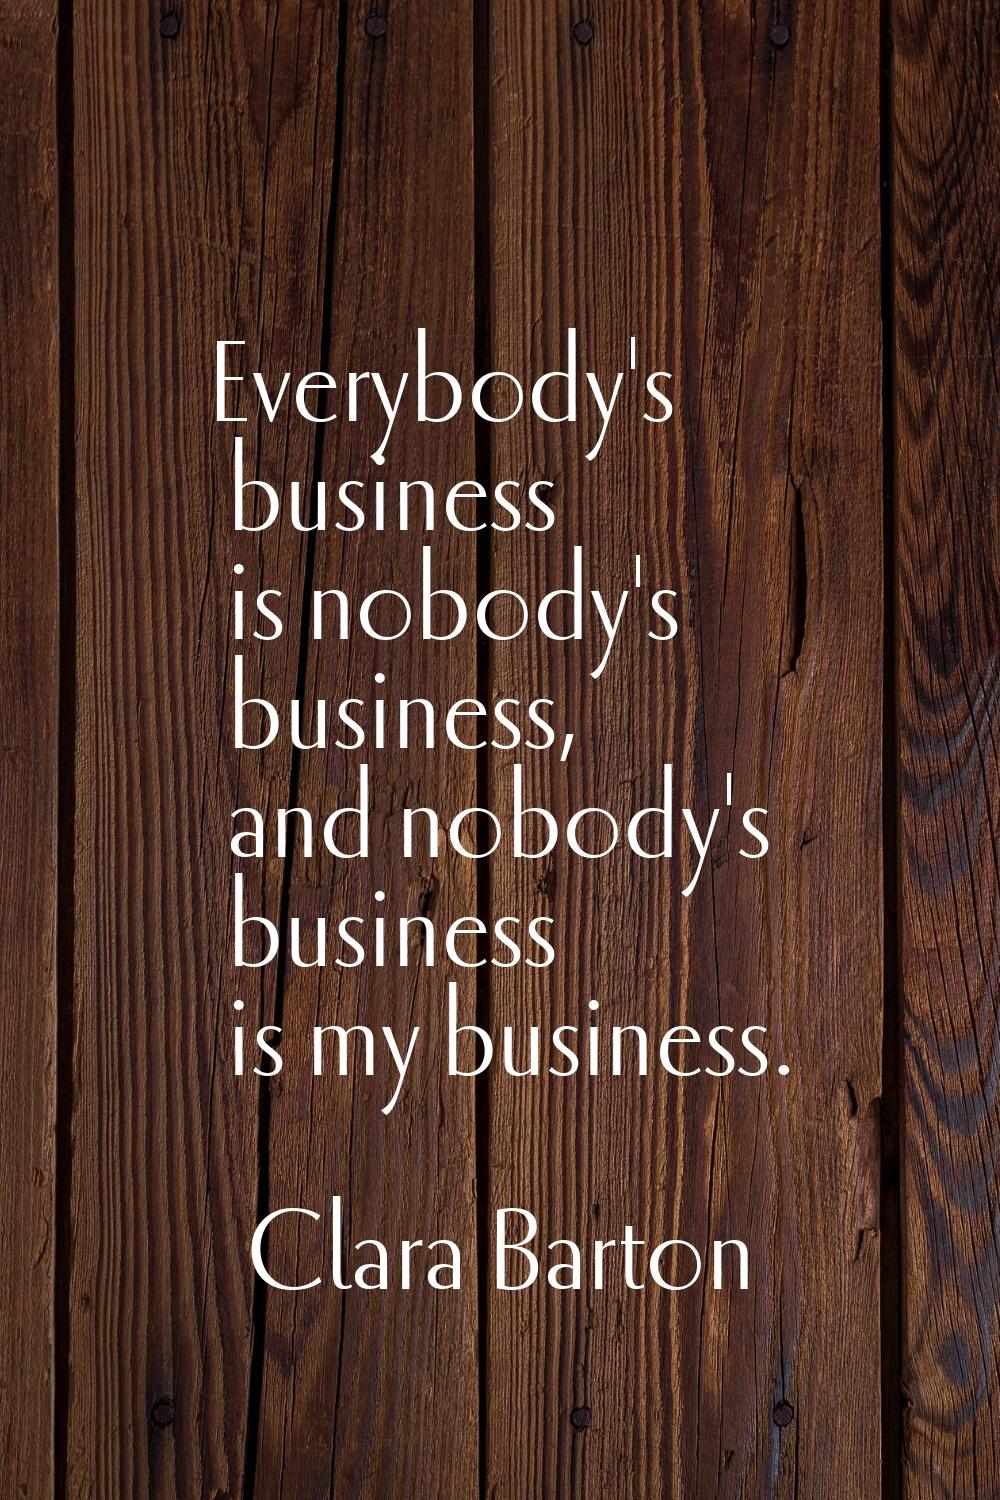 Everybody's business is nobody's business, and nobody's business is my business.